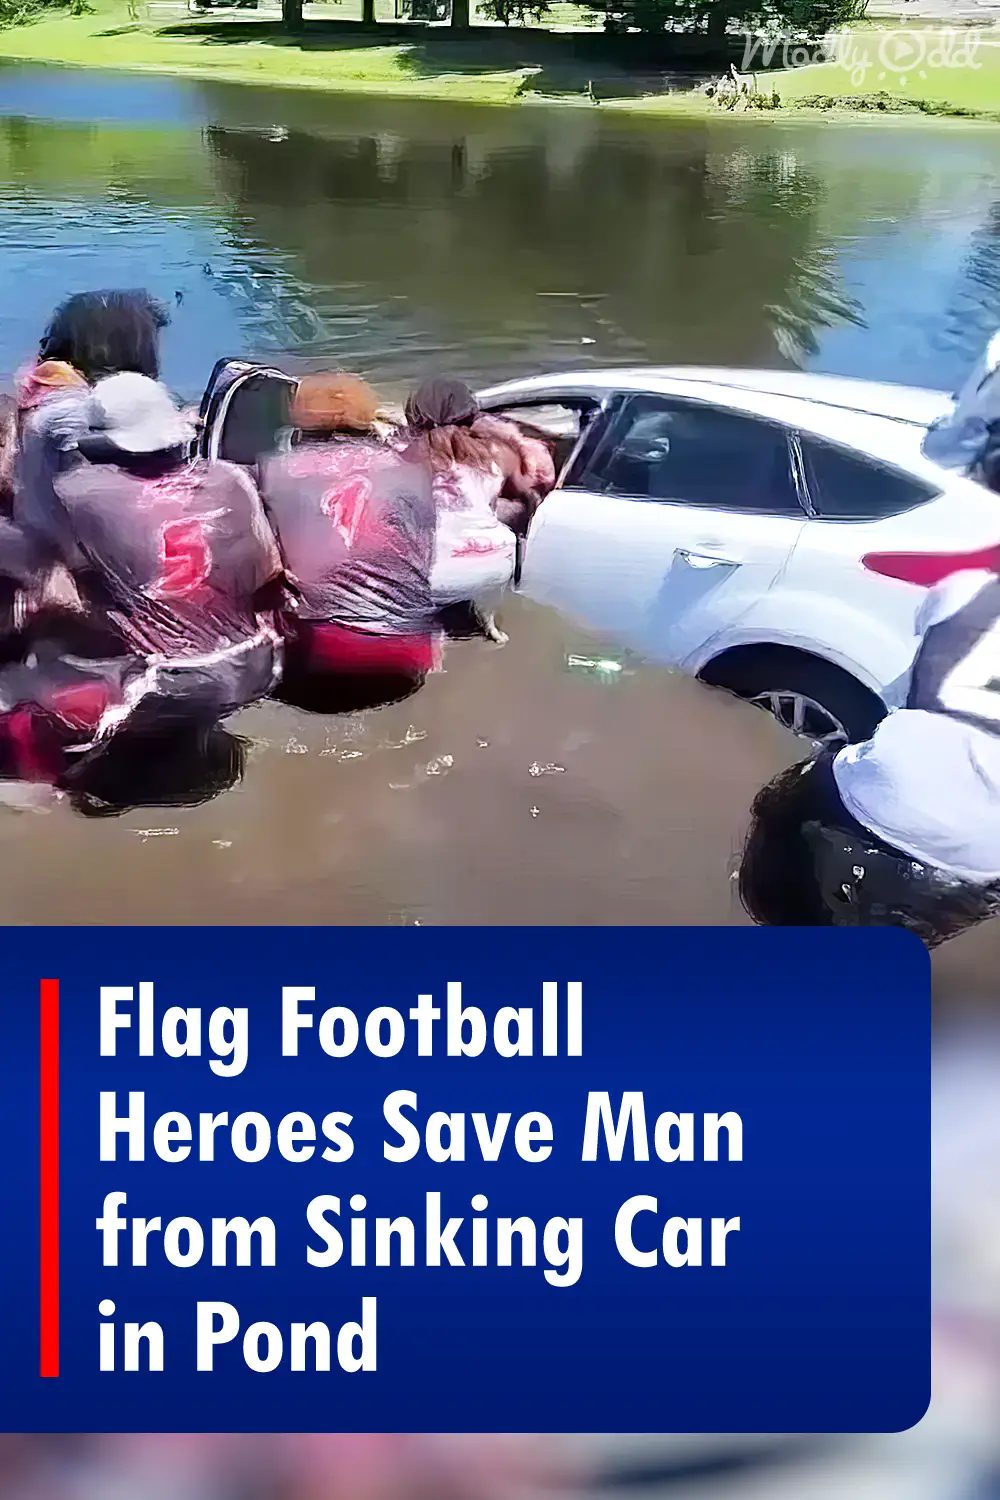 Flag Football Heroes Save Man from Sinking Car in Pond